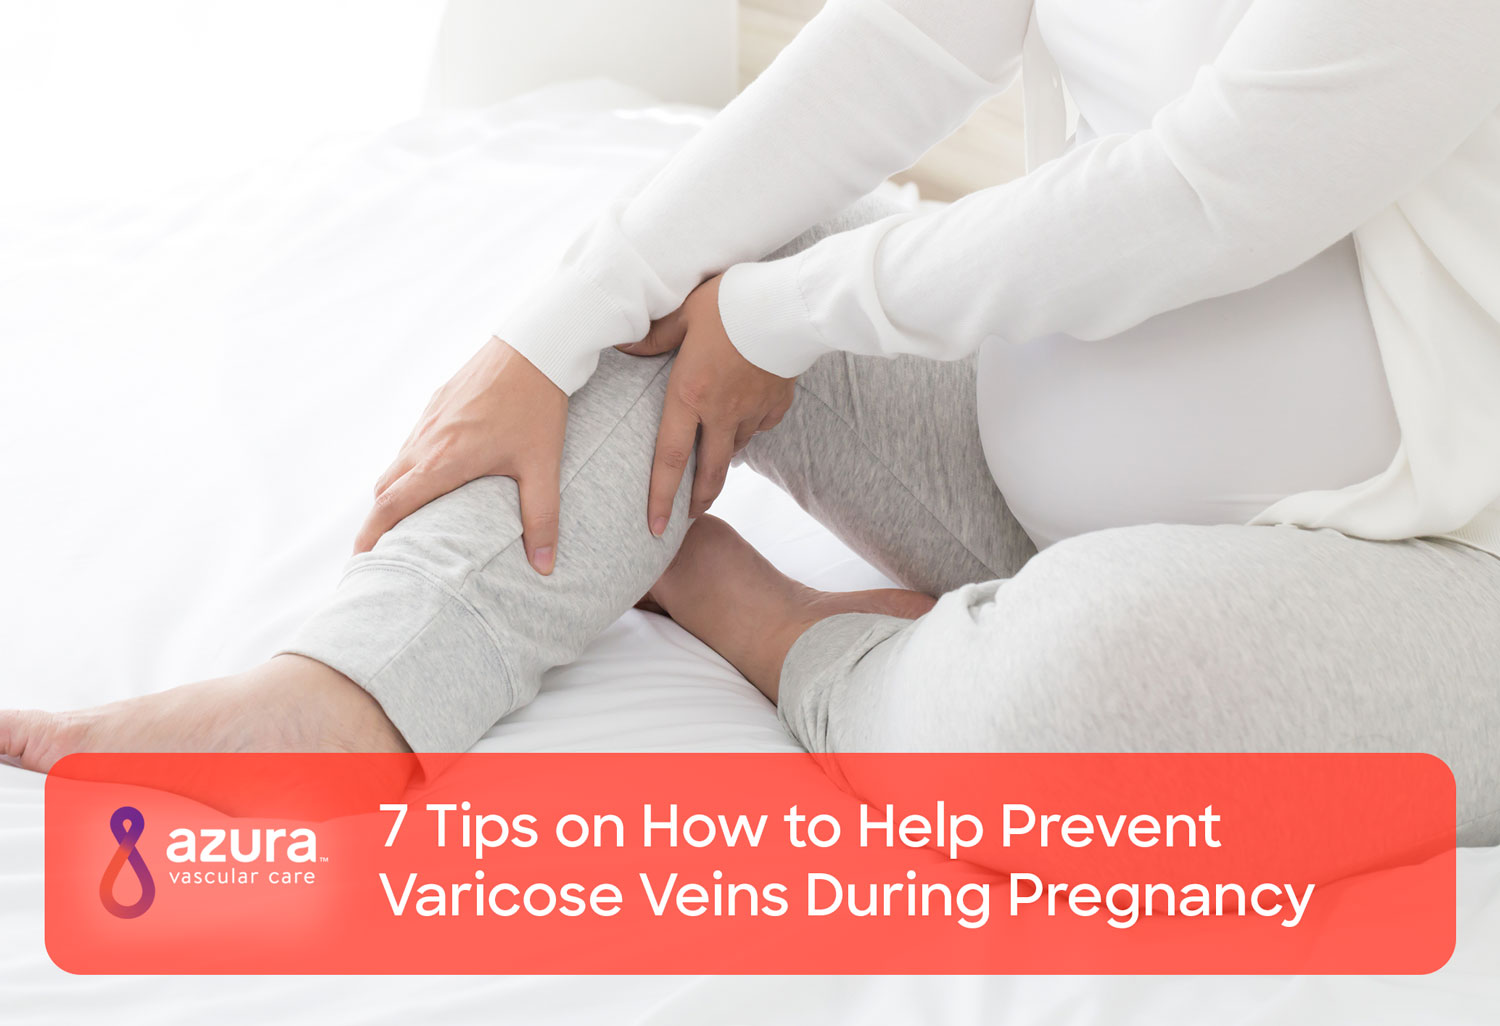 Vascular Access Centre - How to prevent varicose veins from